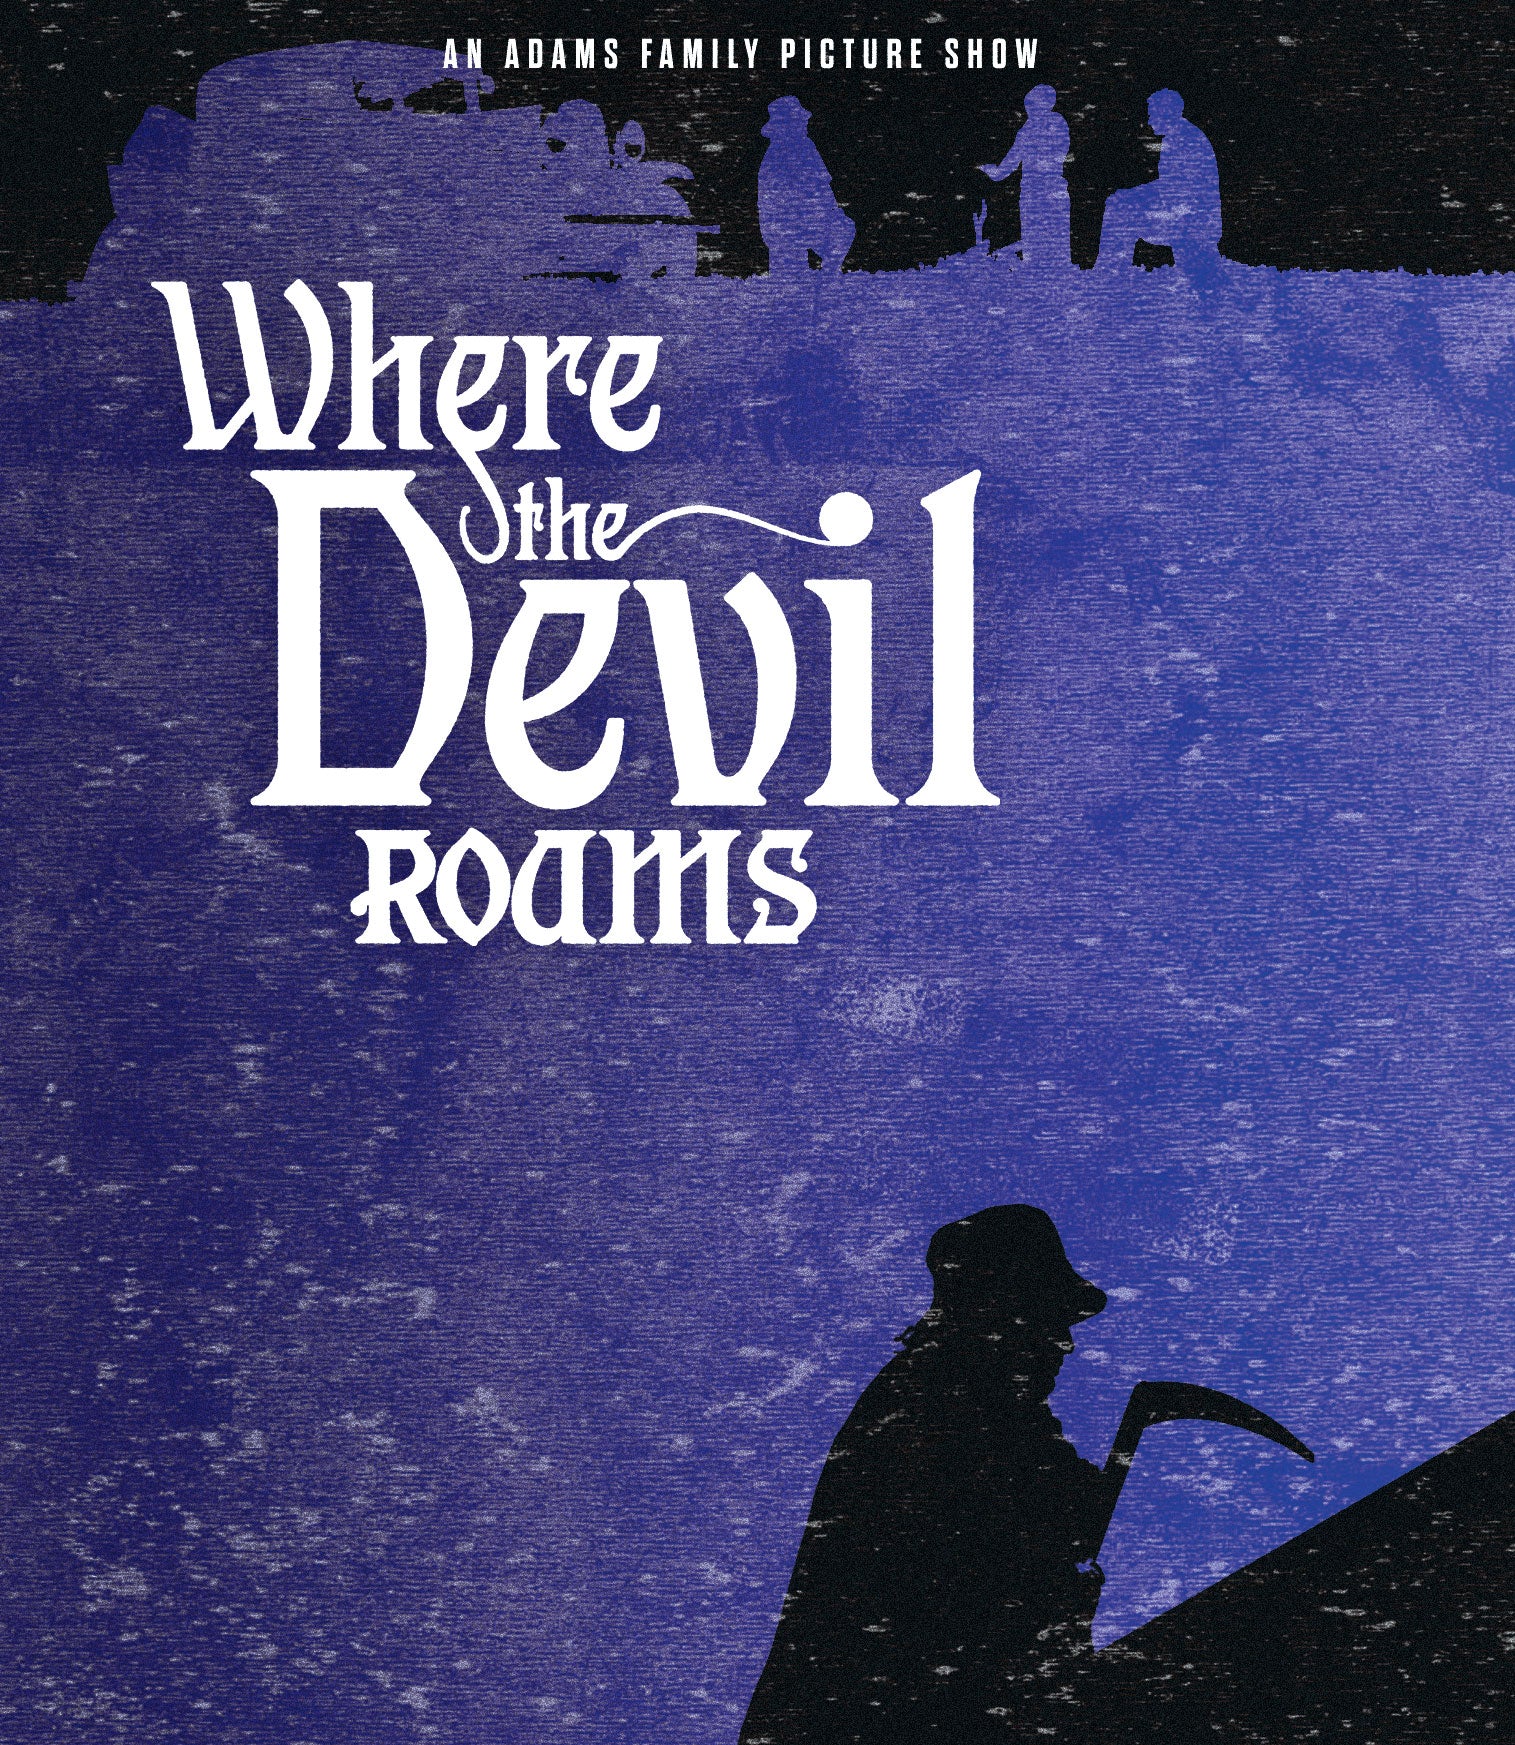 WHERE THE DEVIL ROAMS (LIMITED EDITION) BLU-RAY